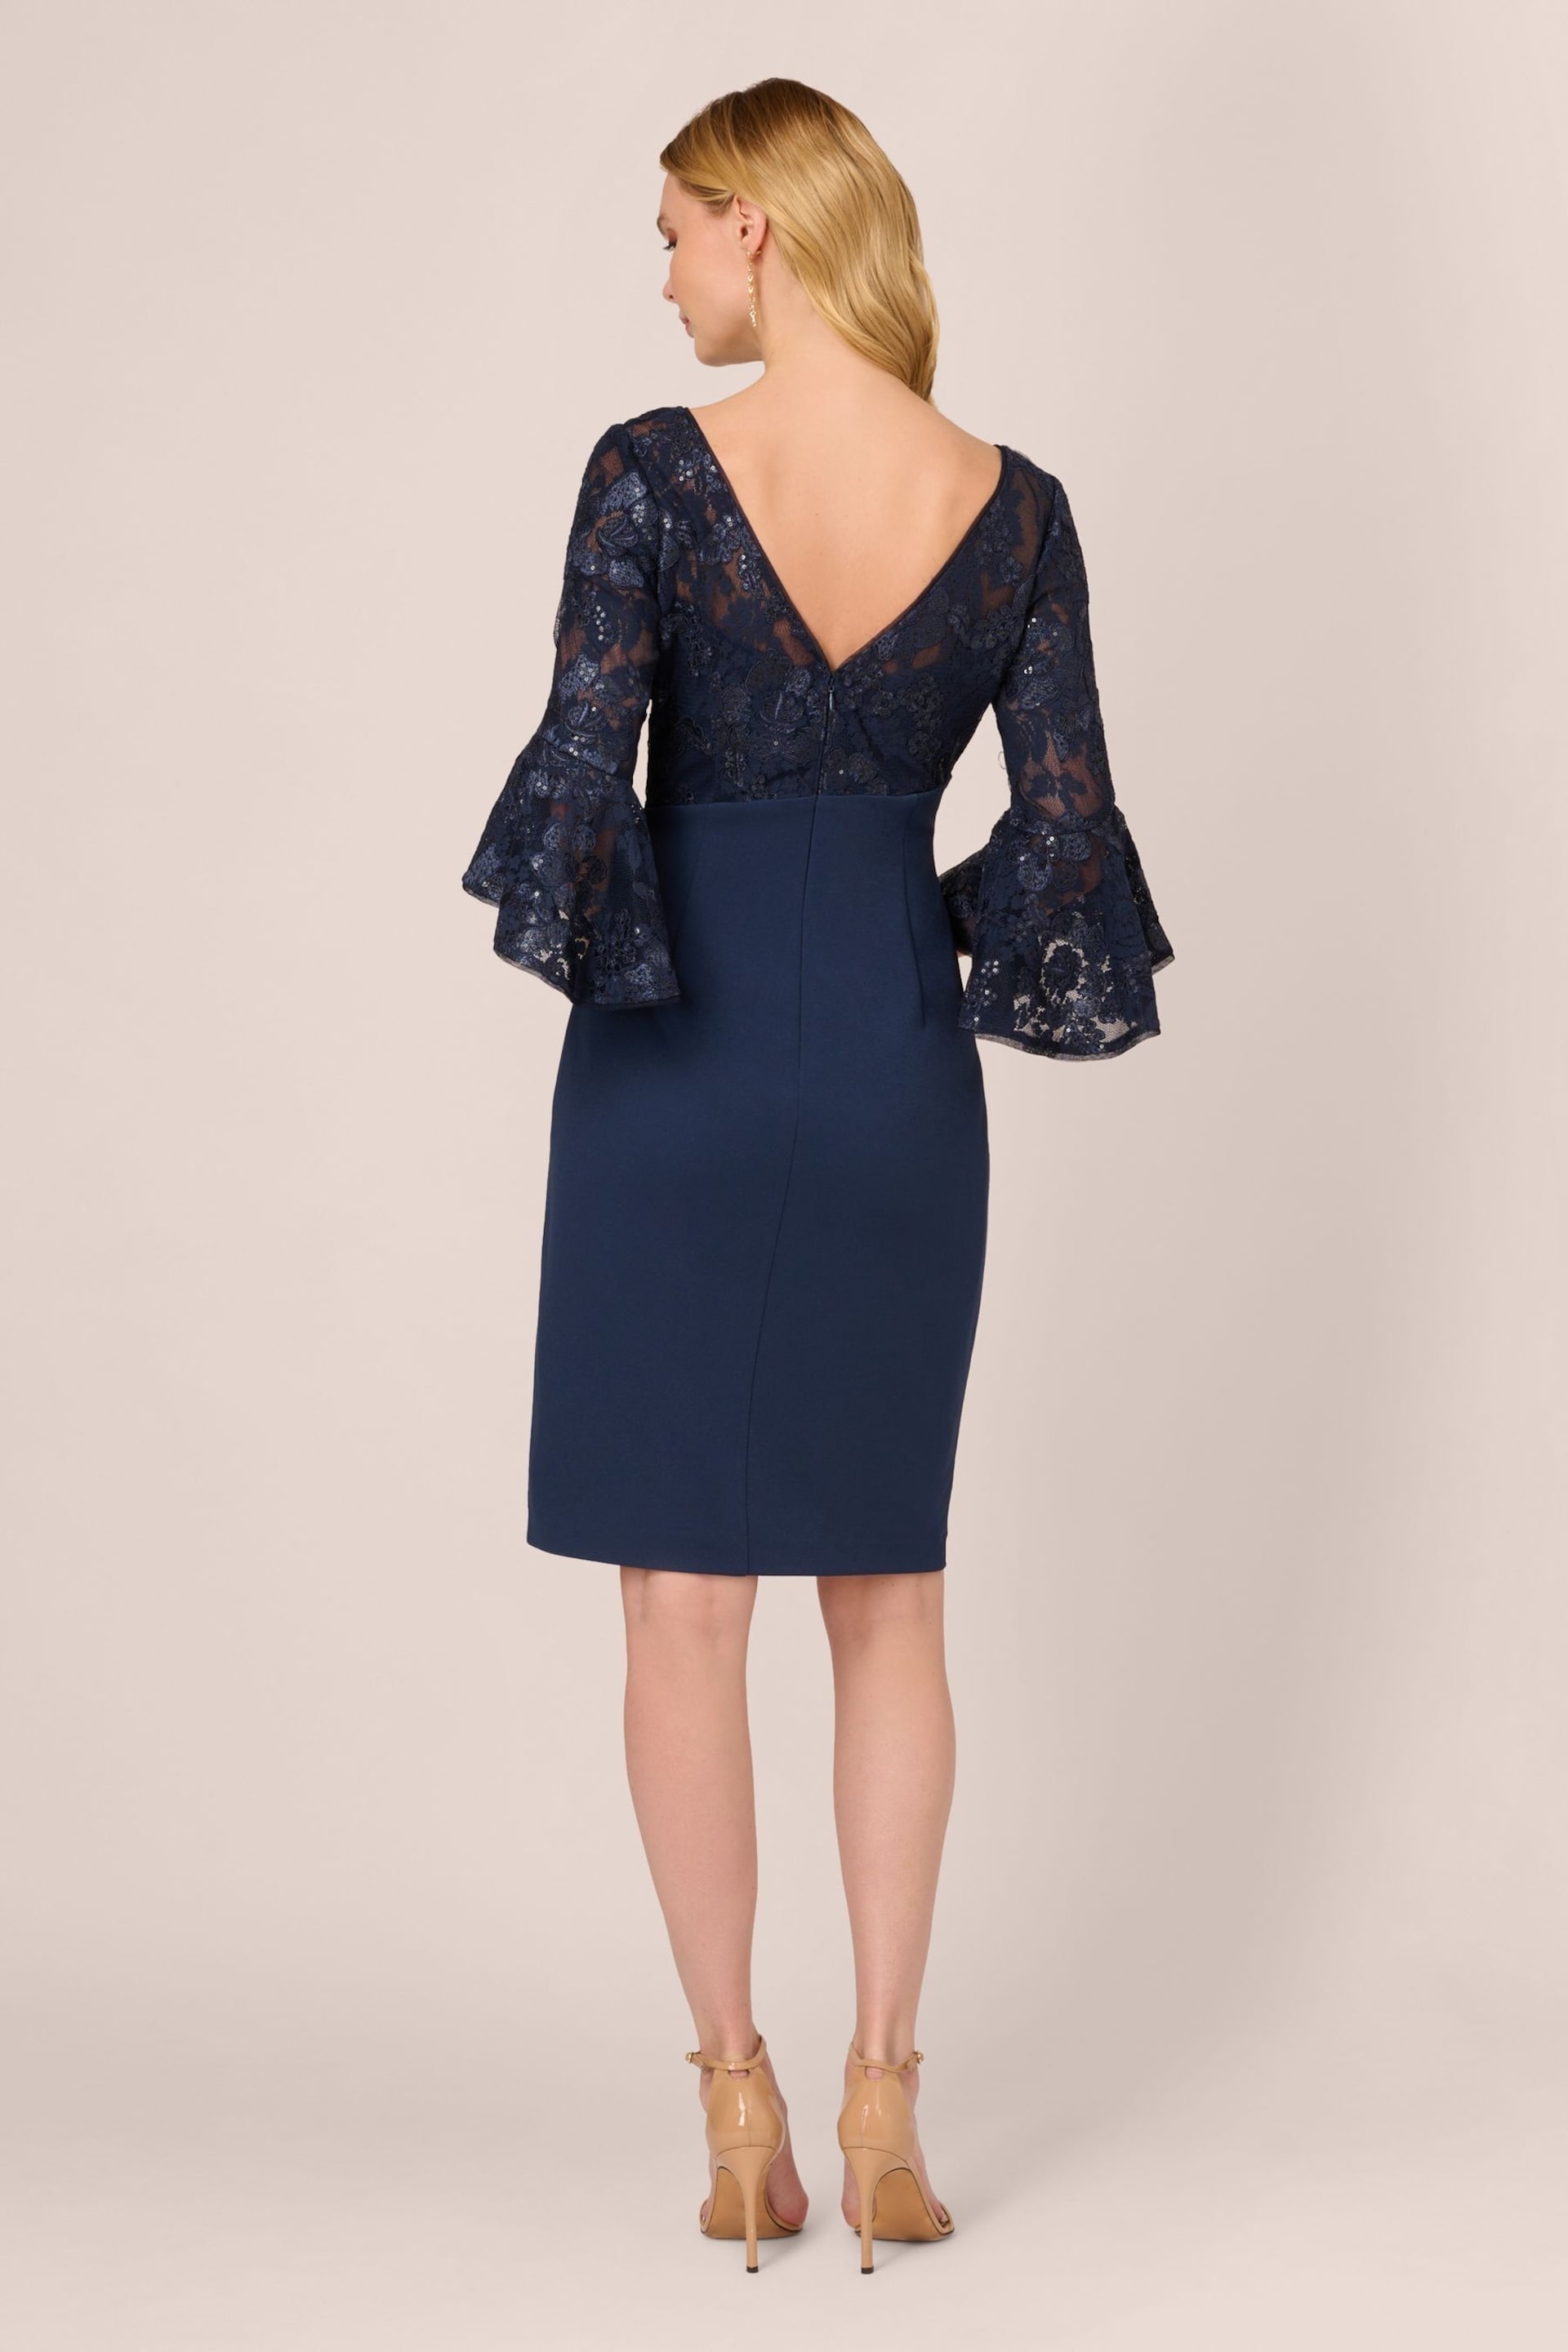 Adrianna Papell Blue Floral Lace Combo Dress - Image 2 of 7